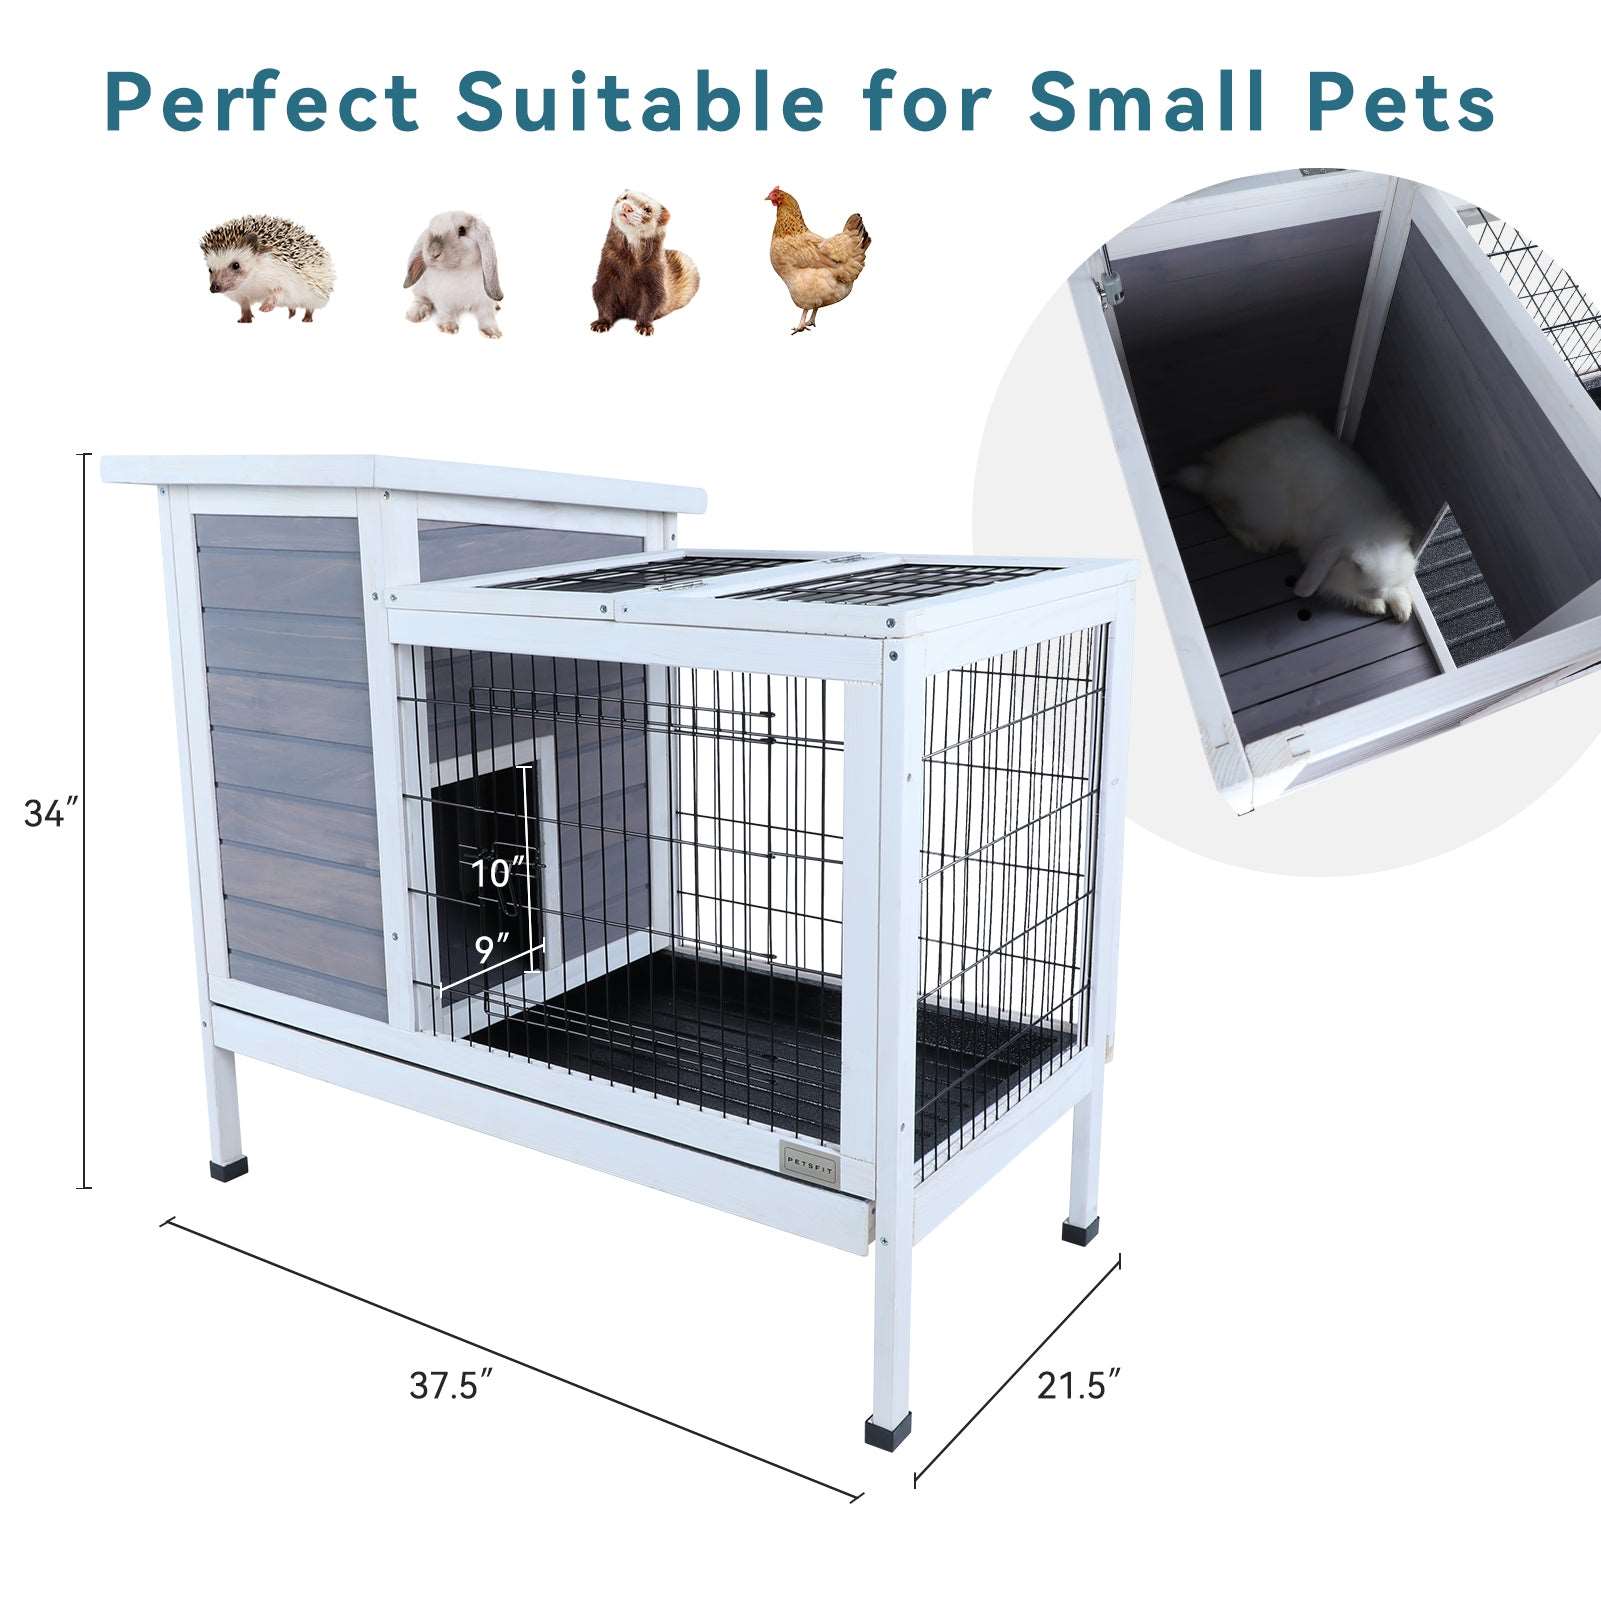 Petsfit-Guinea-Pig-Cage-Rabbit-Hutch-with-Pull-Out-Tray-08